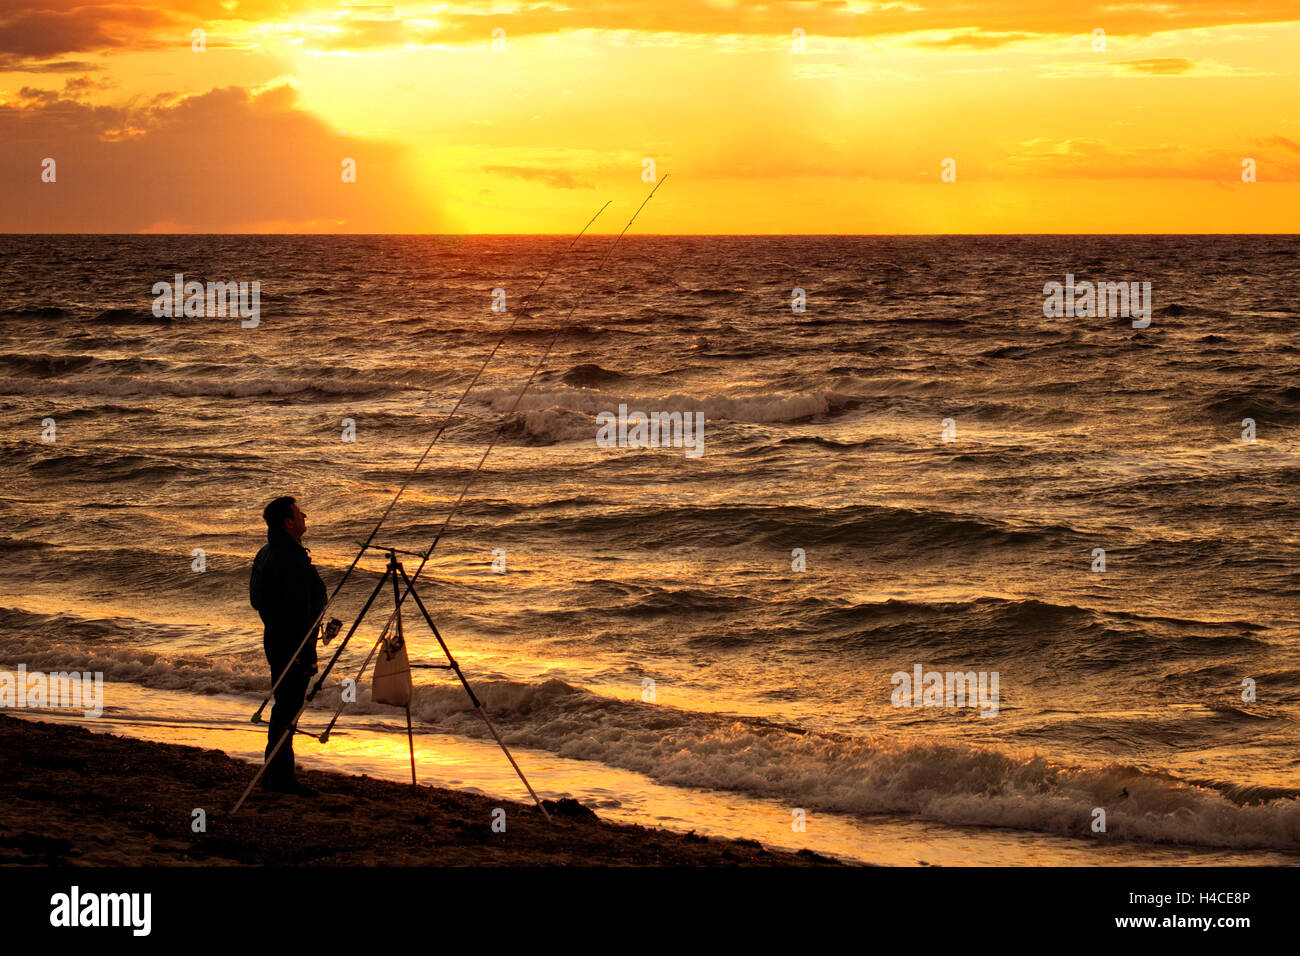 Angler by the sea, vertical, side view, silhouette, sundown Stock Photo